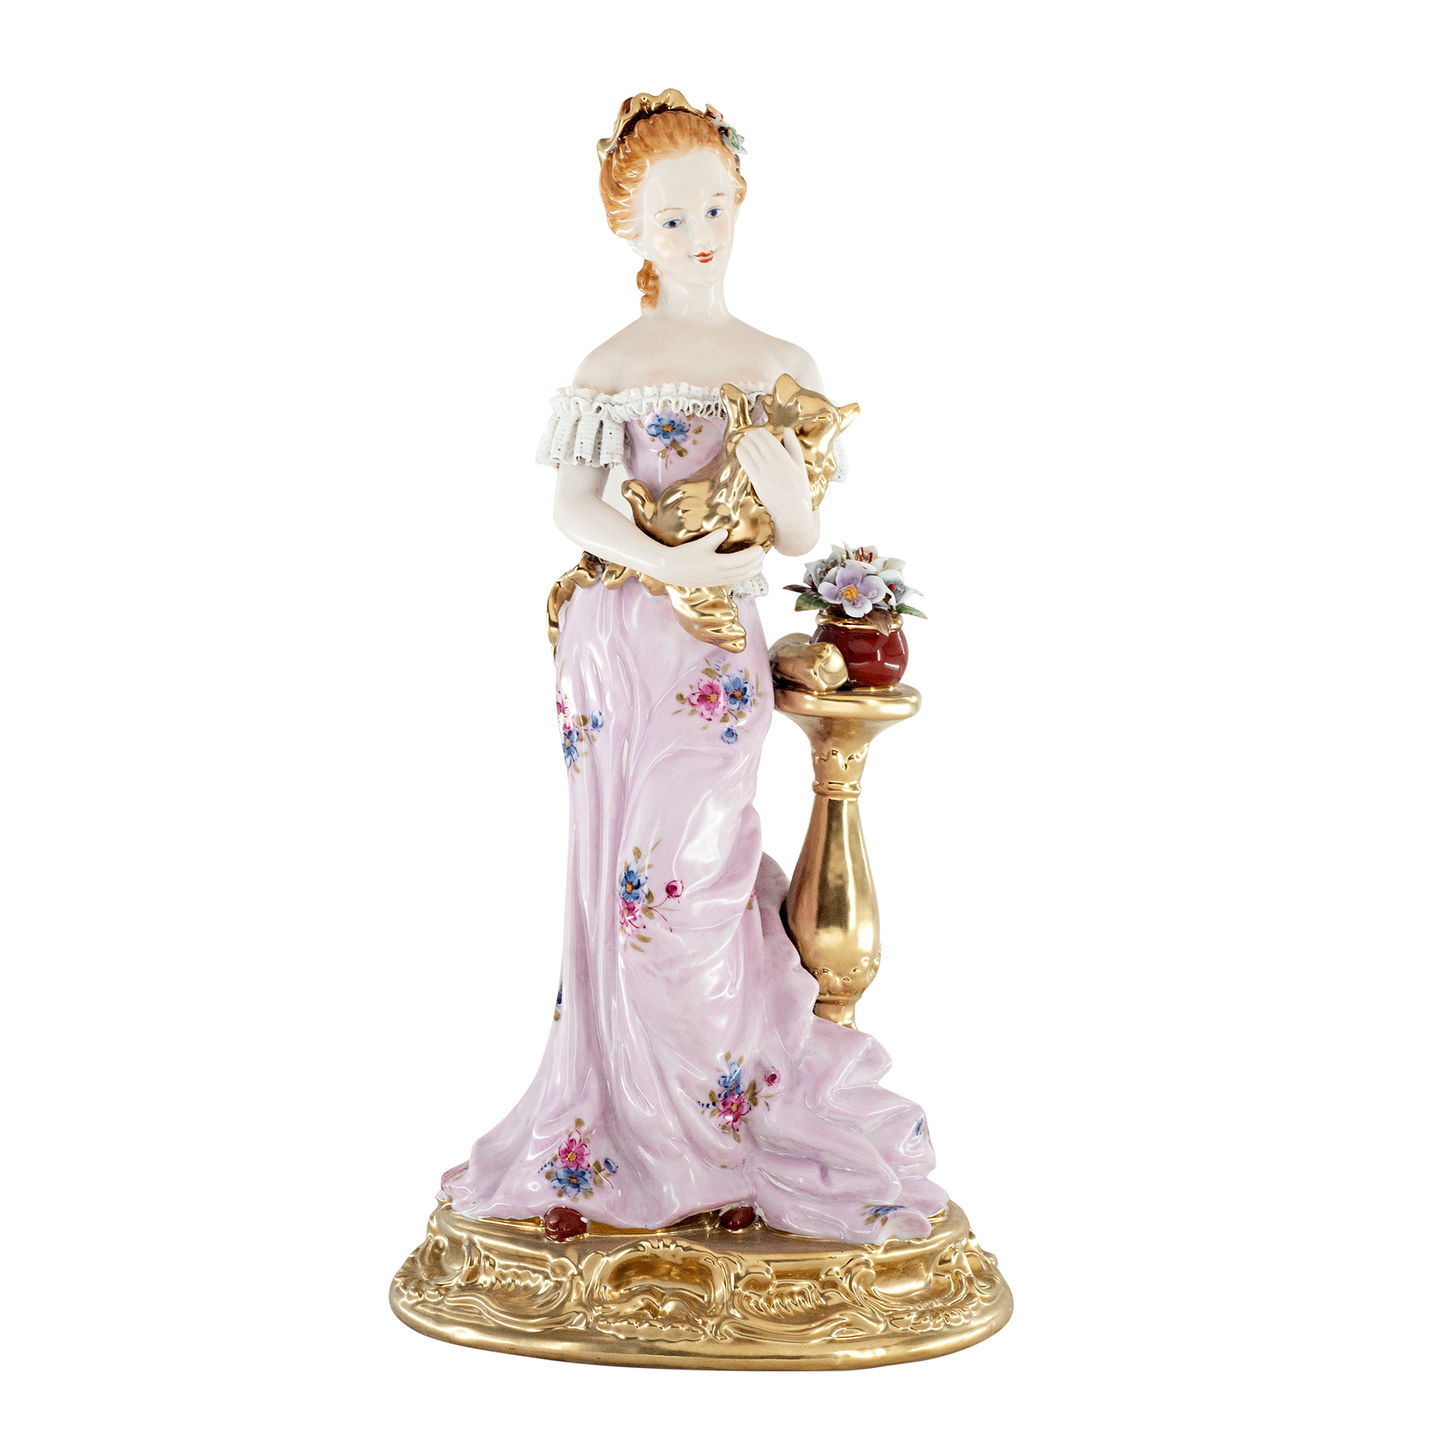 Net Lace Porcelain Woman With Dog